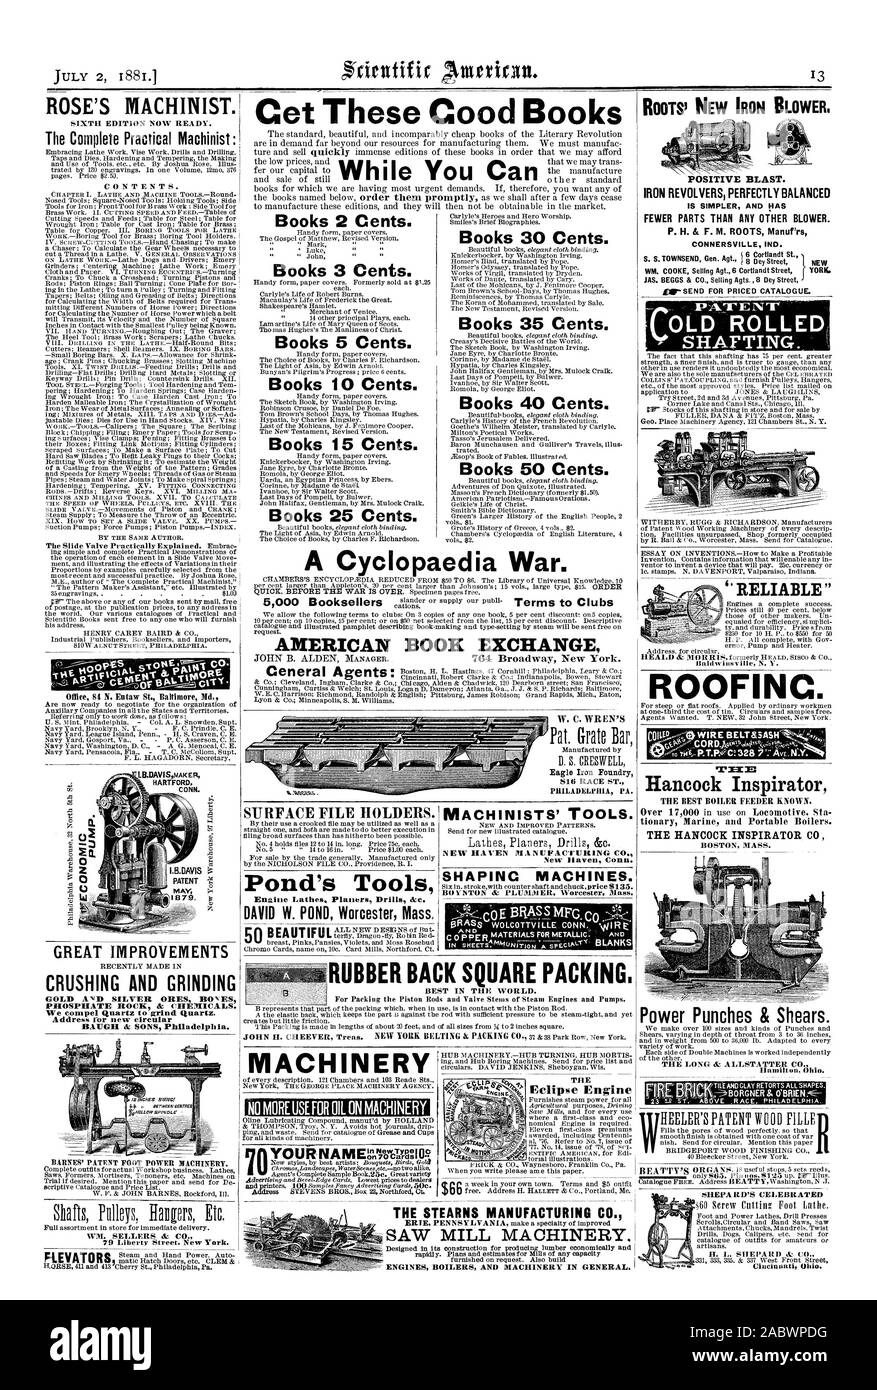 HARTFORD CONN. GREAT IMPROVEMENTS CRUSHING AND GRINDING GOLD AND SILVER ORES BONES PHOSPHATE ROCK & CHEMICALS. We compel Quartz to grind Quartz. Address For new circular ROSE'S MACHINIST. SIXTH EDITION NOW READY. The Complete Practical Machinist: CONTENTS. Get These Good Books Books 2 Cents. Books 3 Cents. Books 5 Cents. Books 10 Cents. AMERICAN BOOK EXCHANGE MACHINISTS' TOOLS. NEW  HAVEN MANU FACTURING CO' New Haven Conn. SHAPING MACHINES. BLANKS MACHINERY NO MORE USE FOR OIL ON MACHINERY THE STEARNS MANUFACTURING CO. SAW MILL MACHINERY. Designed in its construction for producing lumber Stock Photo